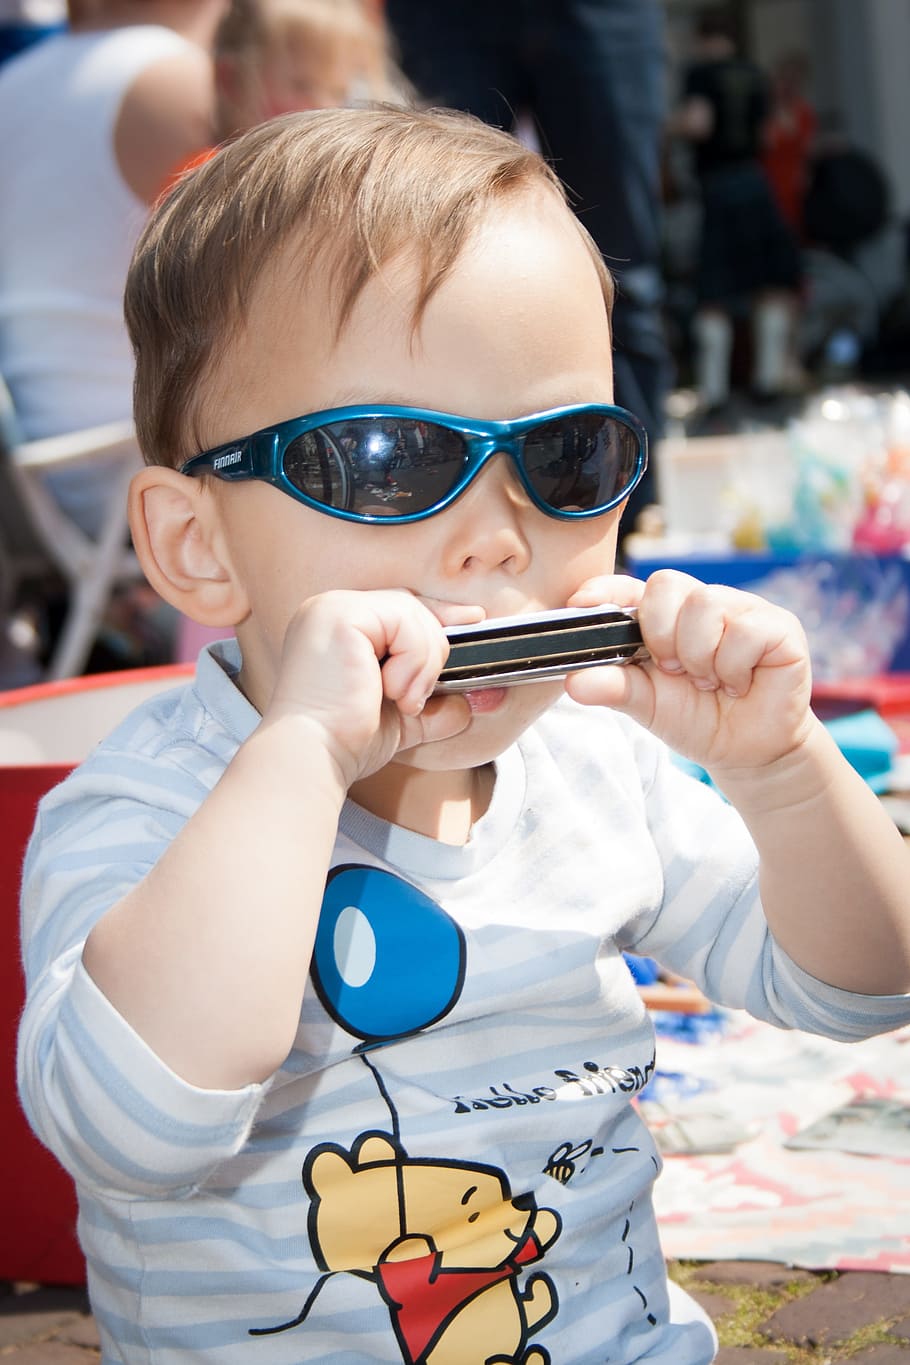 boy playing harmonica, nursery, toddler, child, uk, ukkie, harmonica, play along, occur, spectacle